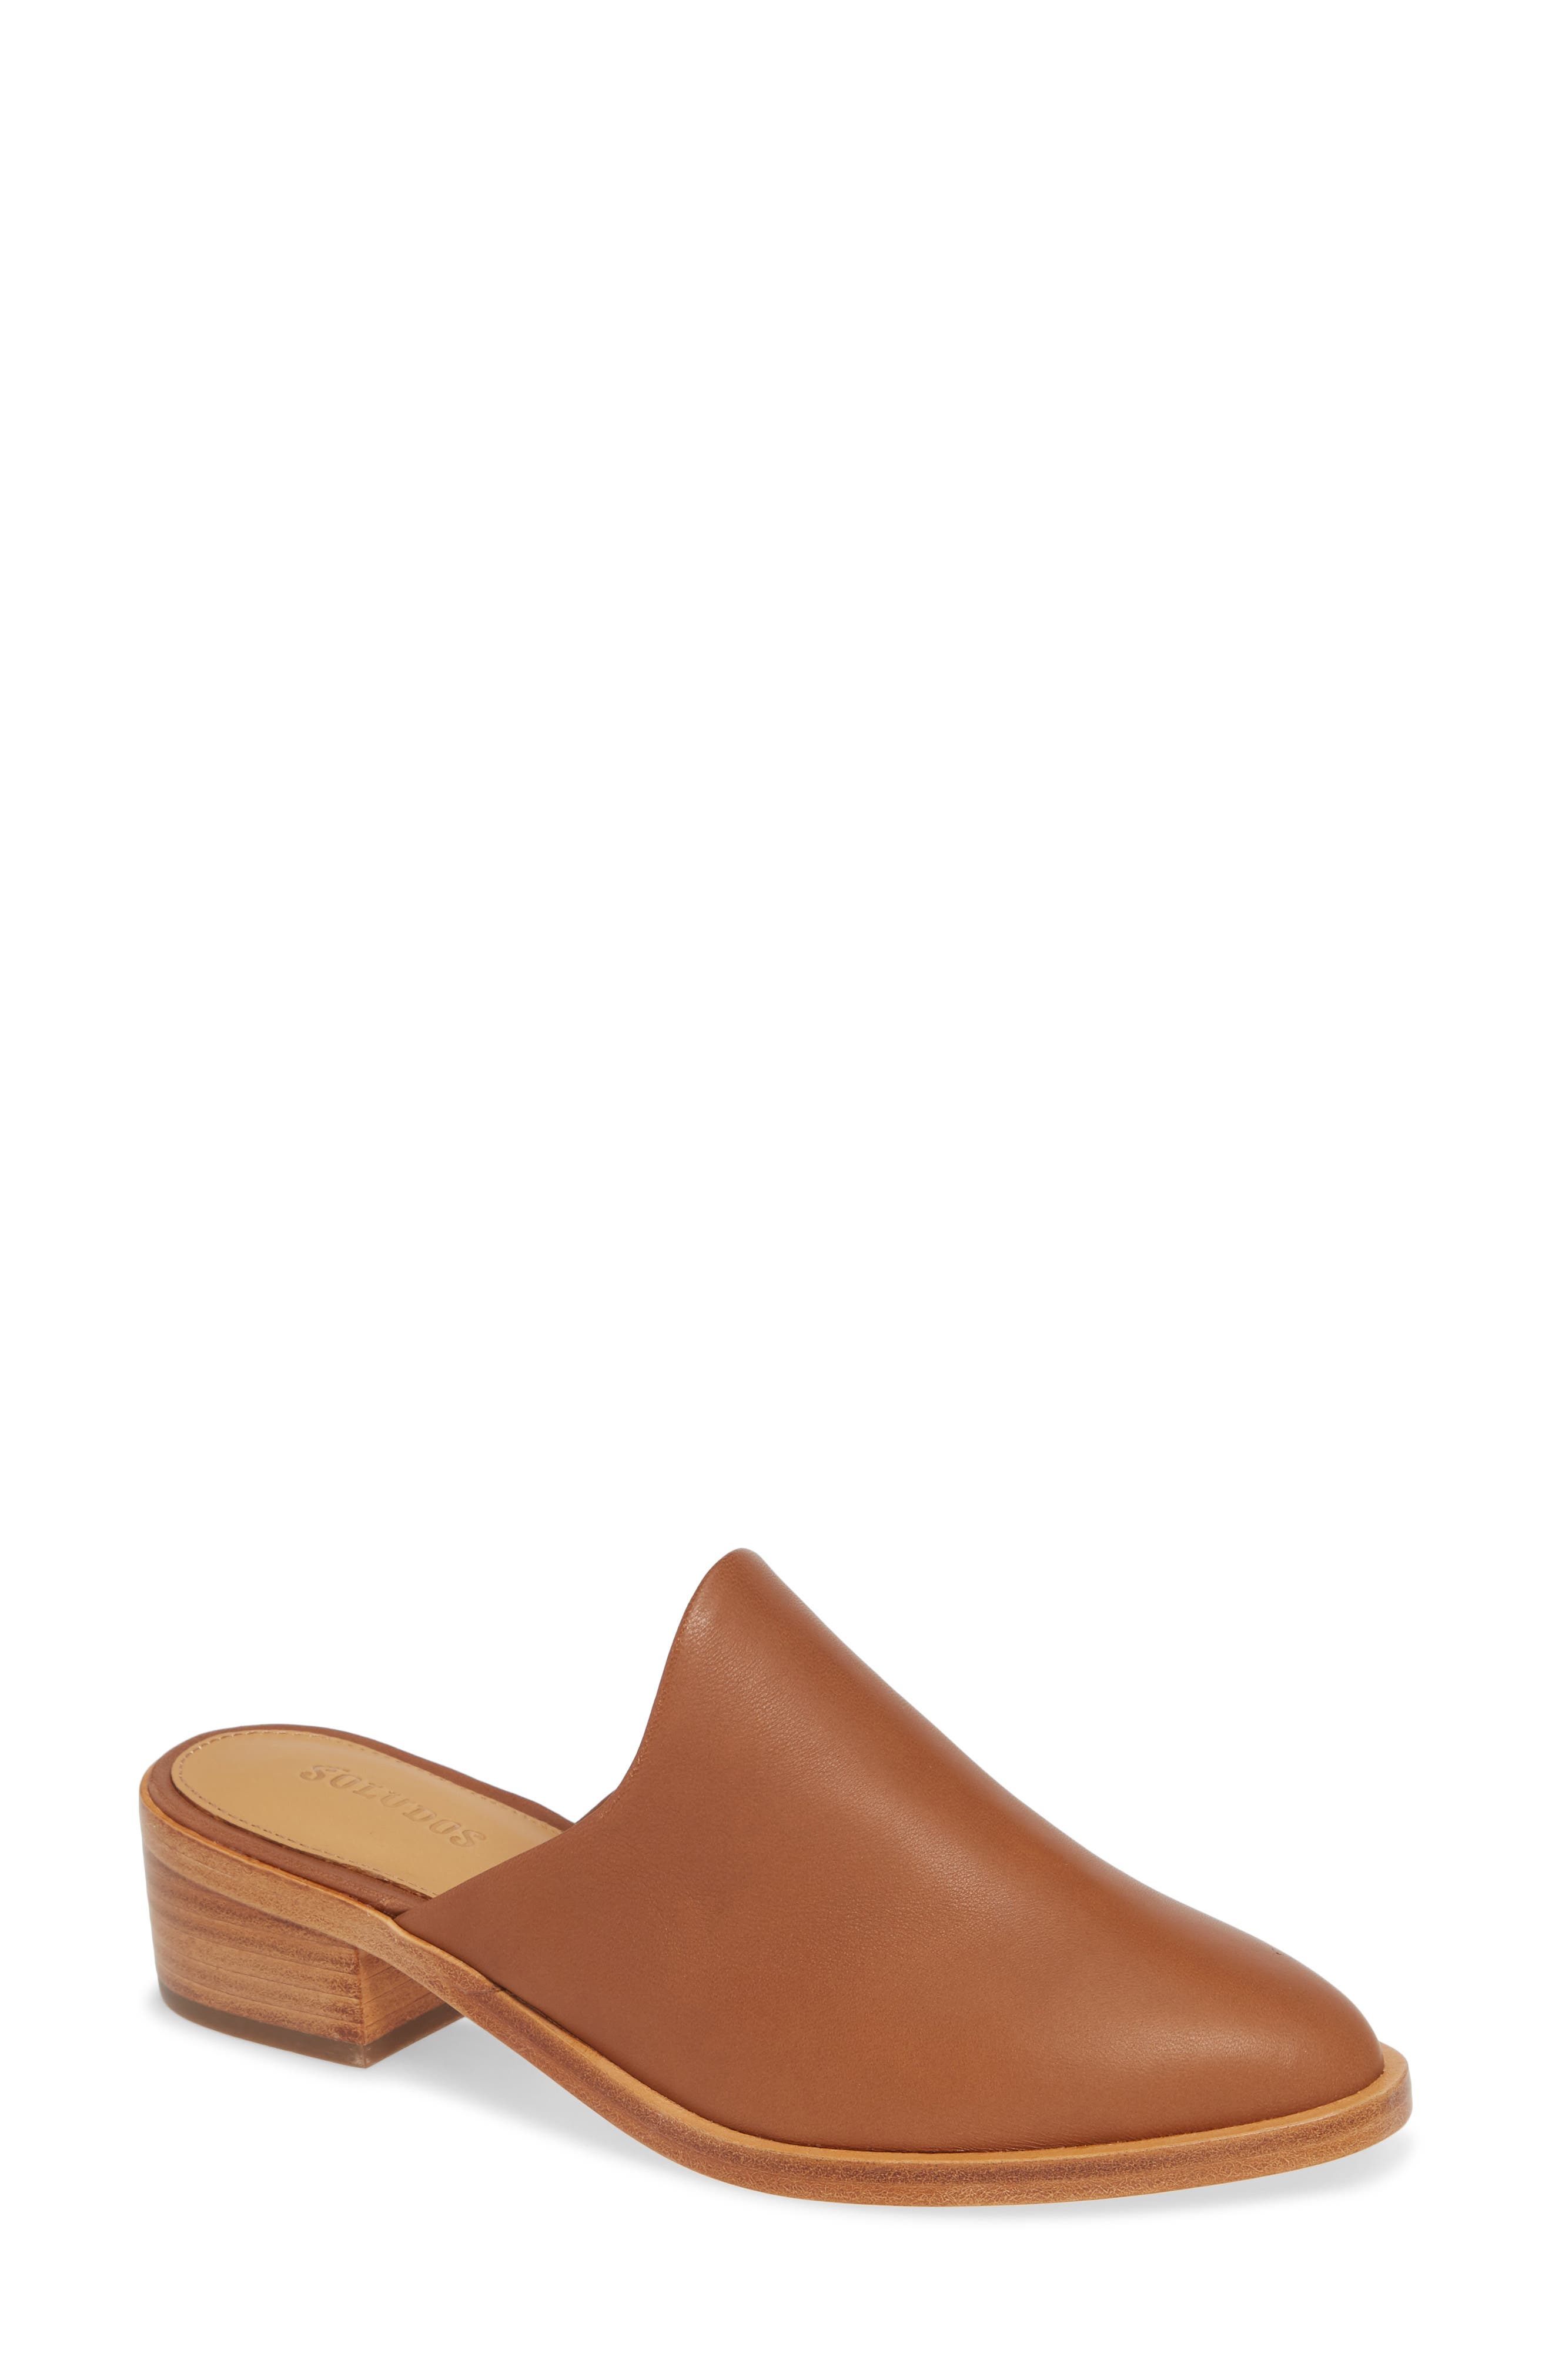 soludos leather mule